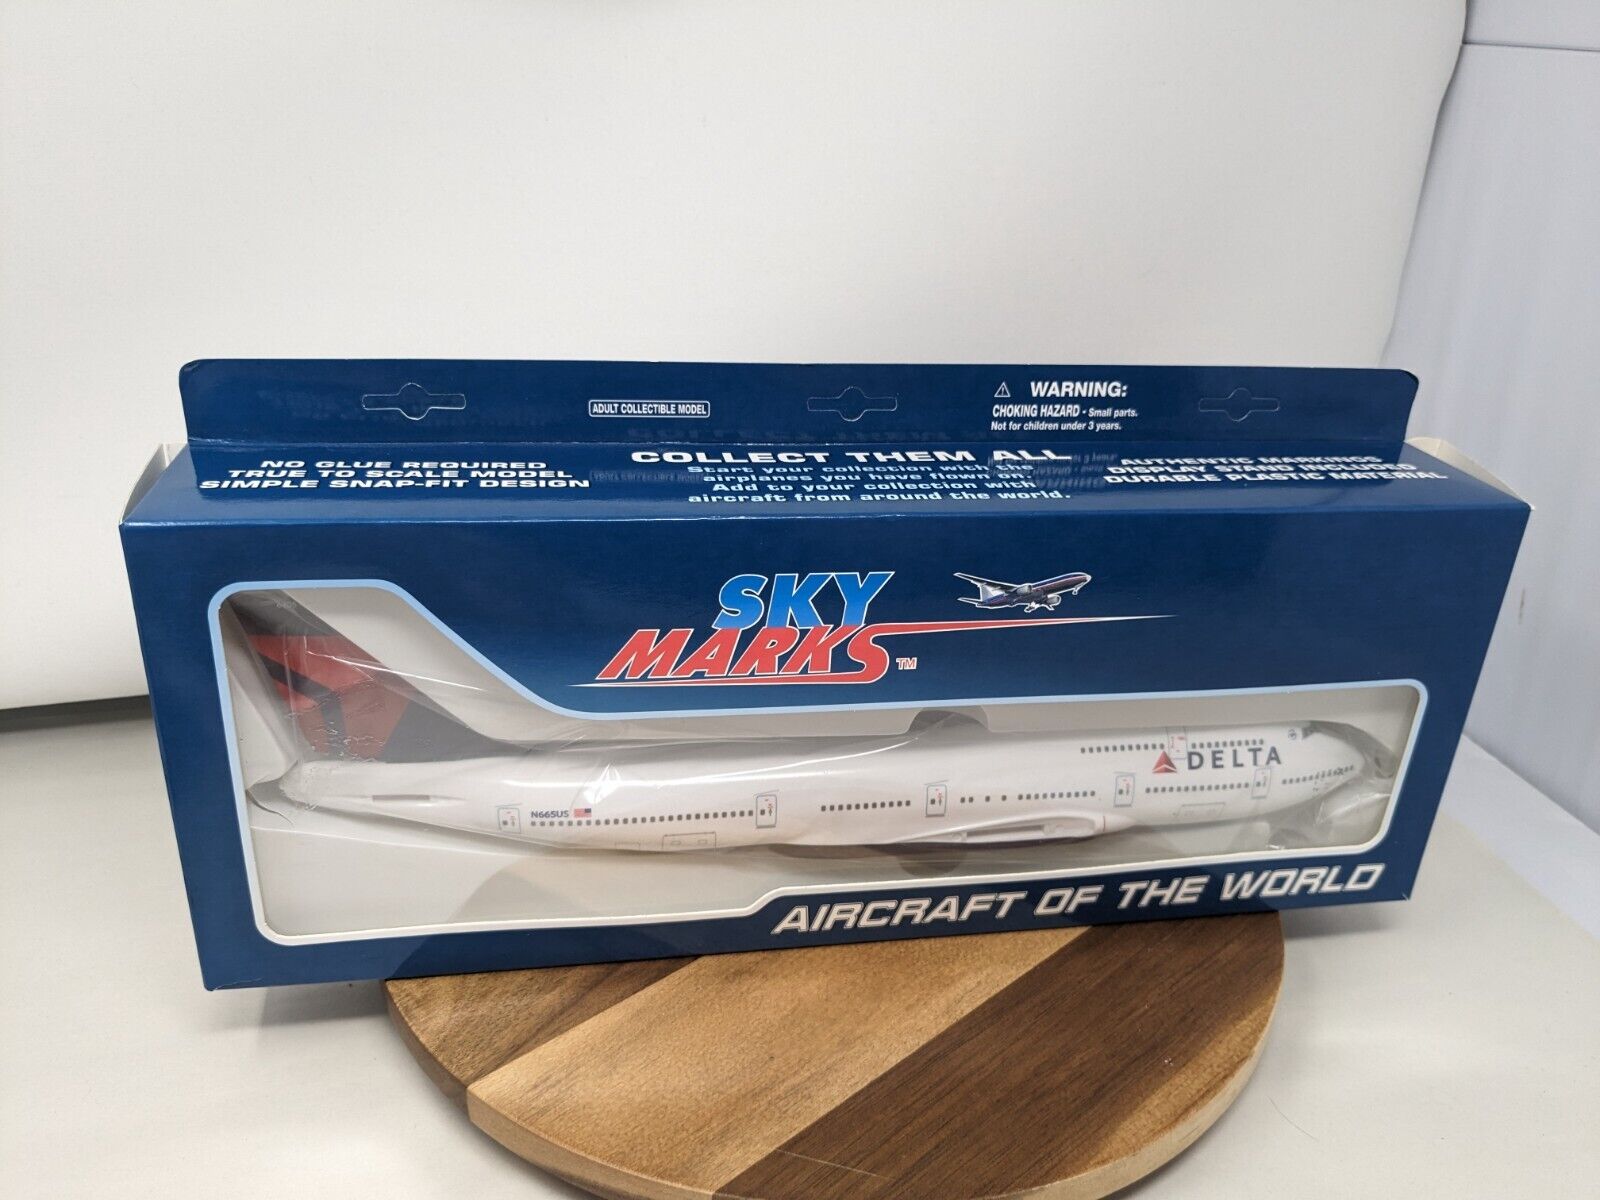 1/200 SKYMARKS DELTA AIRLINES BOEING B747-400 W/GEAR AIRCRAFT MODEL Open Box